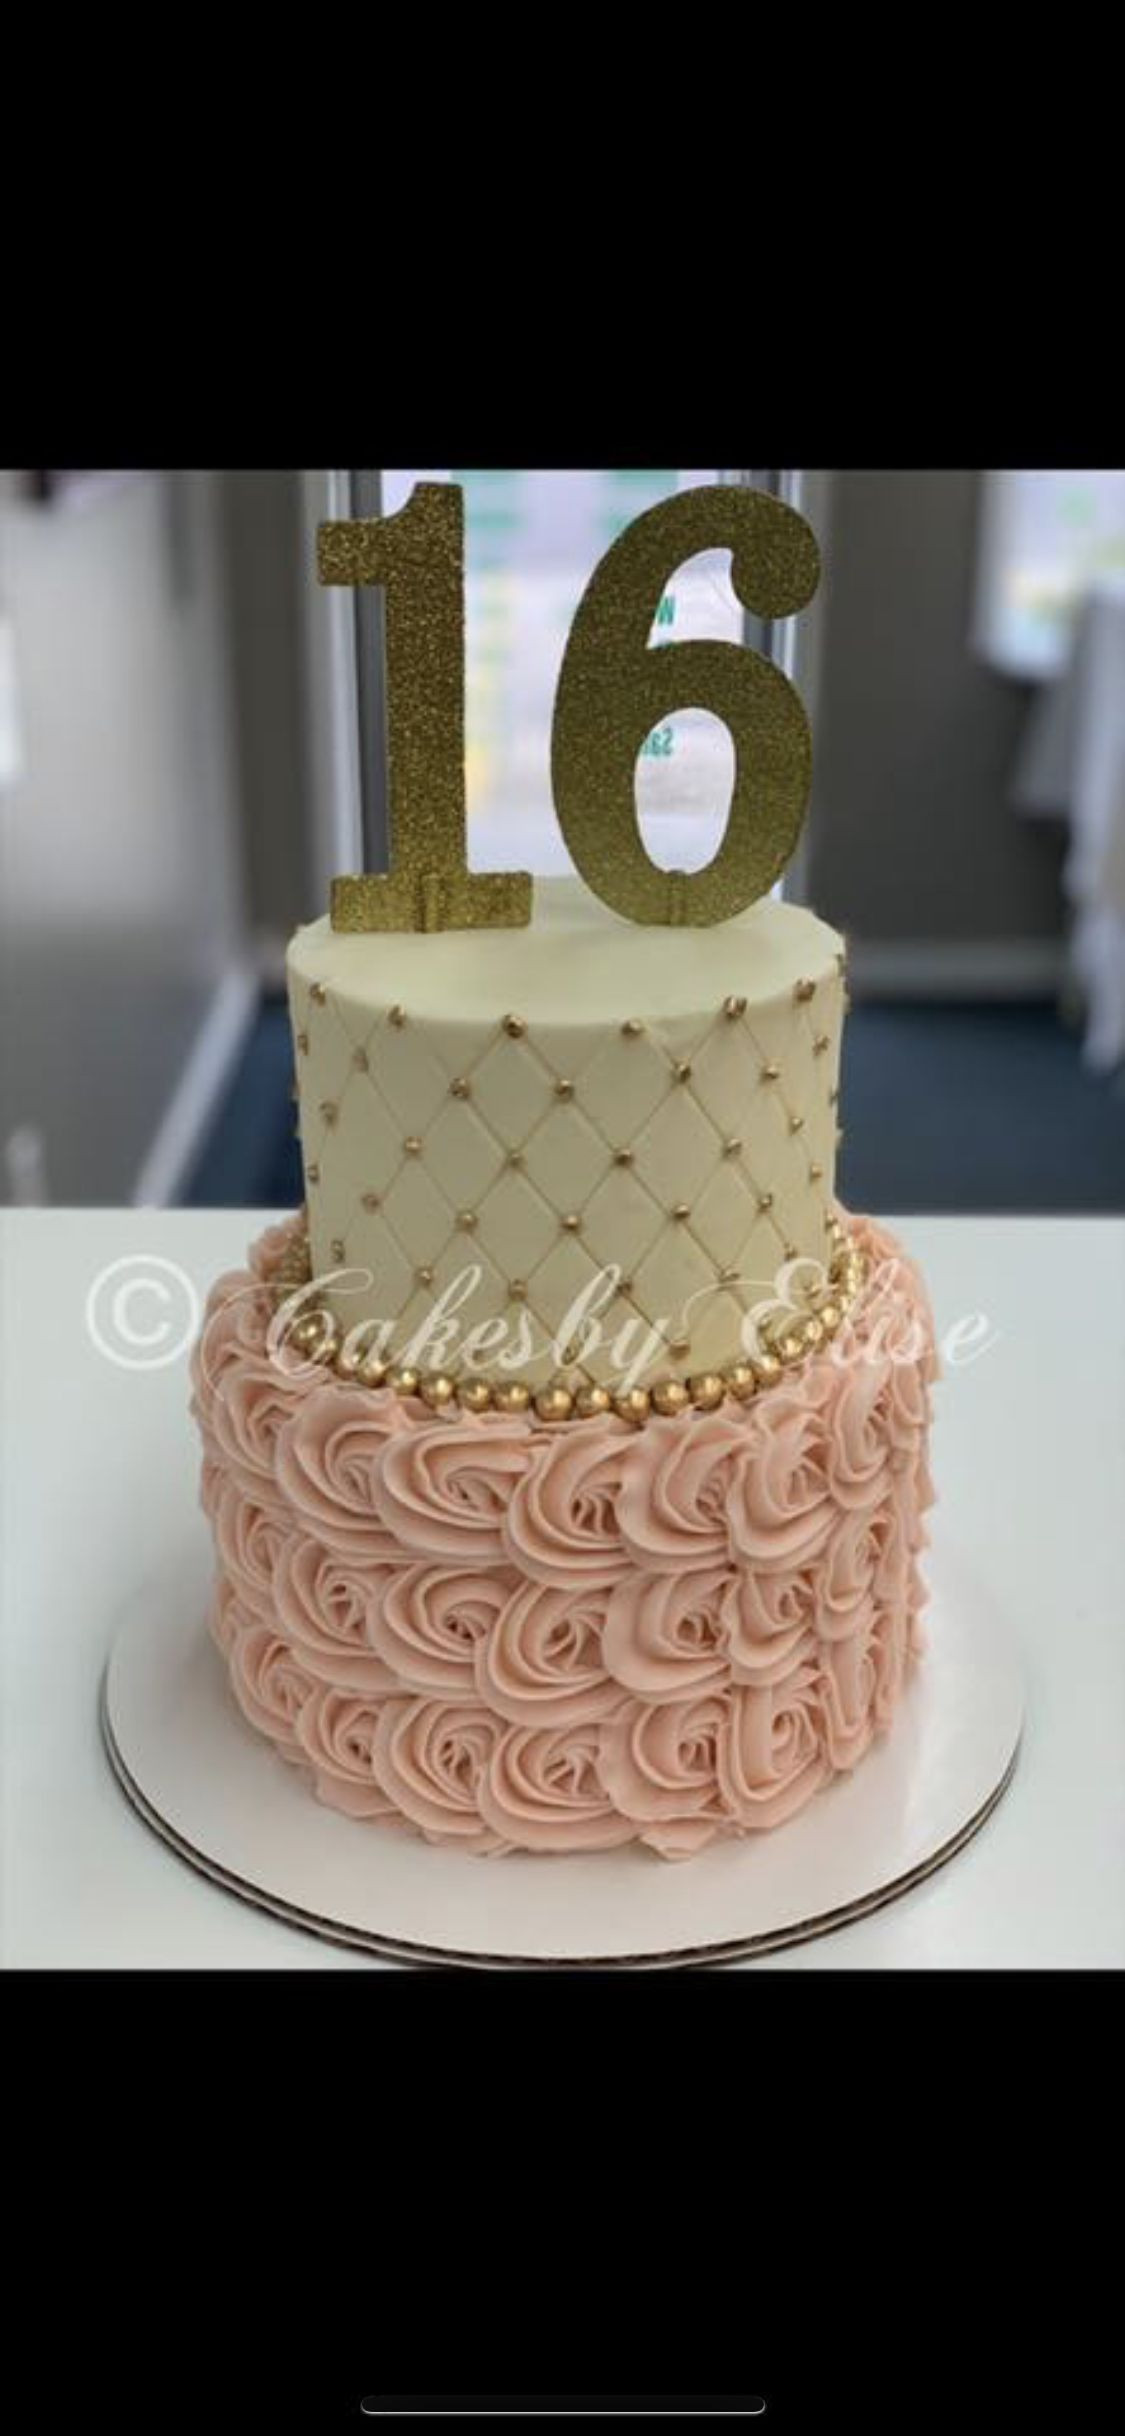 16Th Anniversary Gift Ideas
 16Th Birthday Cakes Ideas Made this cake for a 16th